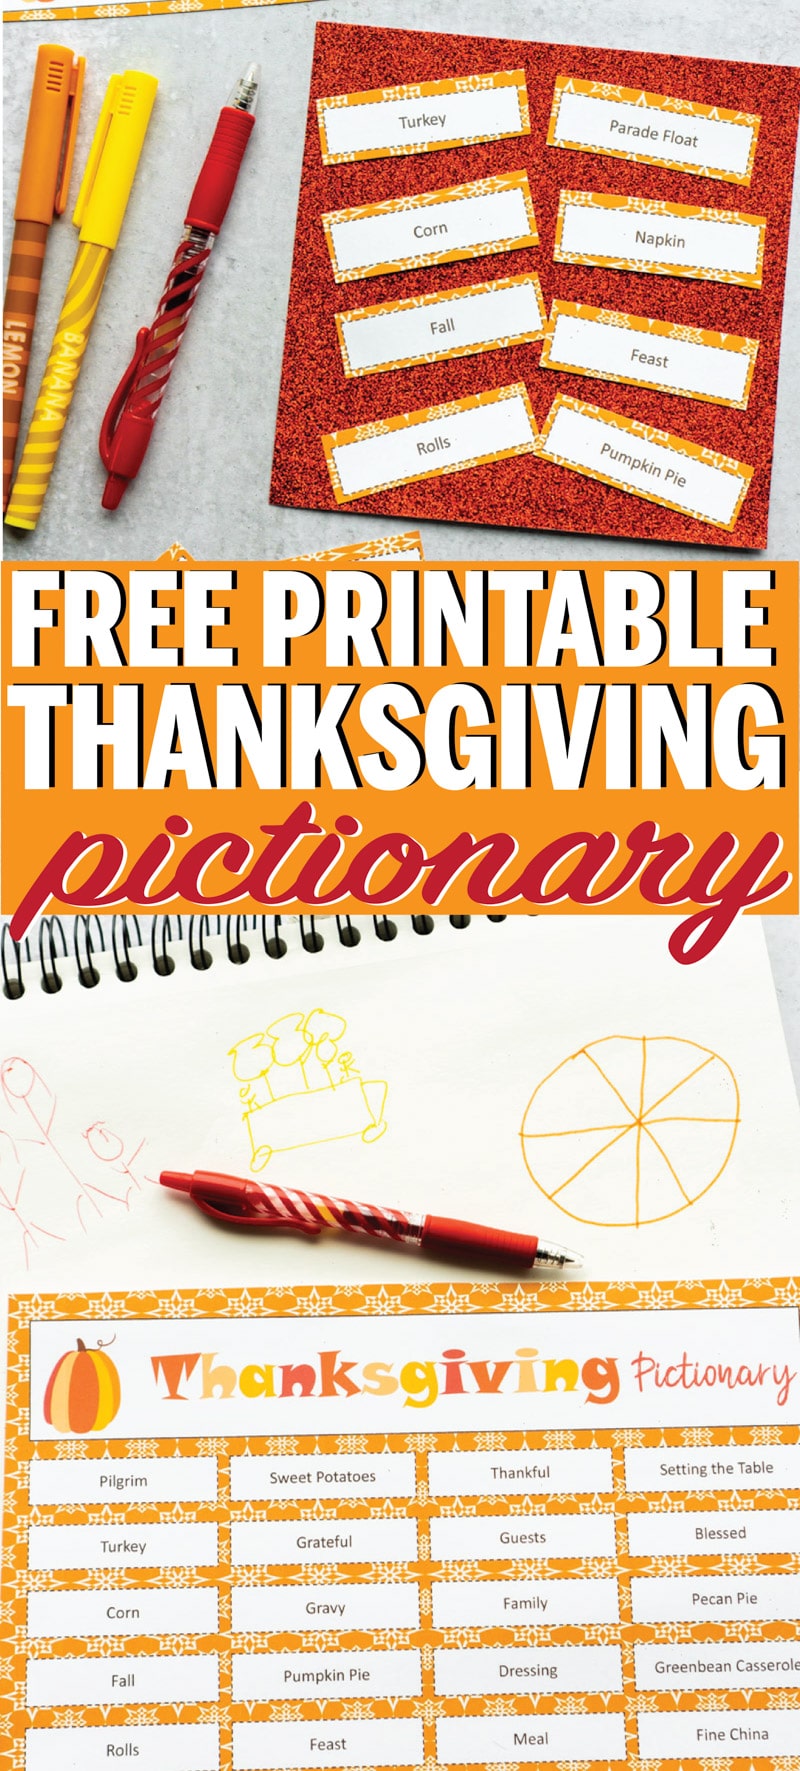 Easy Thanksgiving Pictionary Game  FREE Printable  - 84